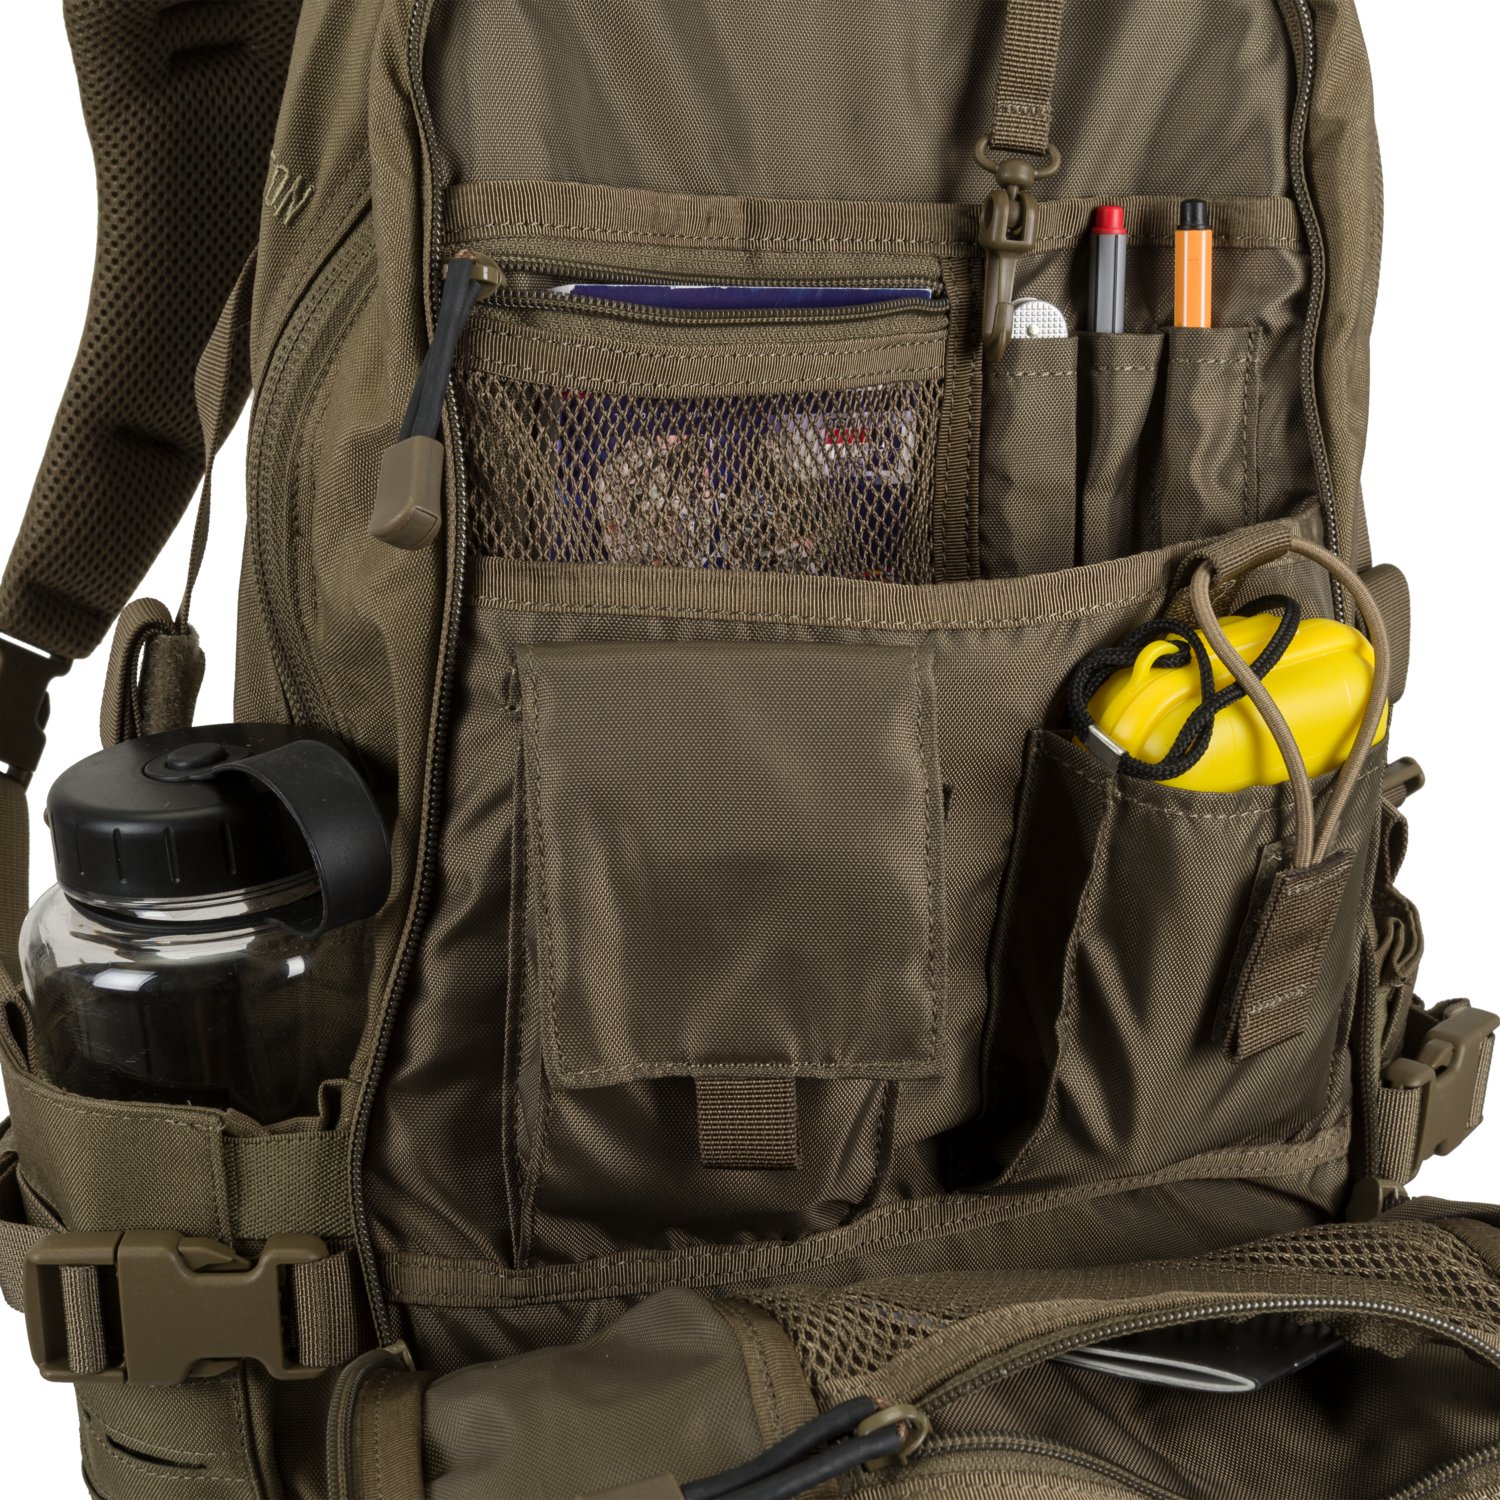 Dragon Egg MK II Backpack | On Duty Equipment Contract Division